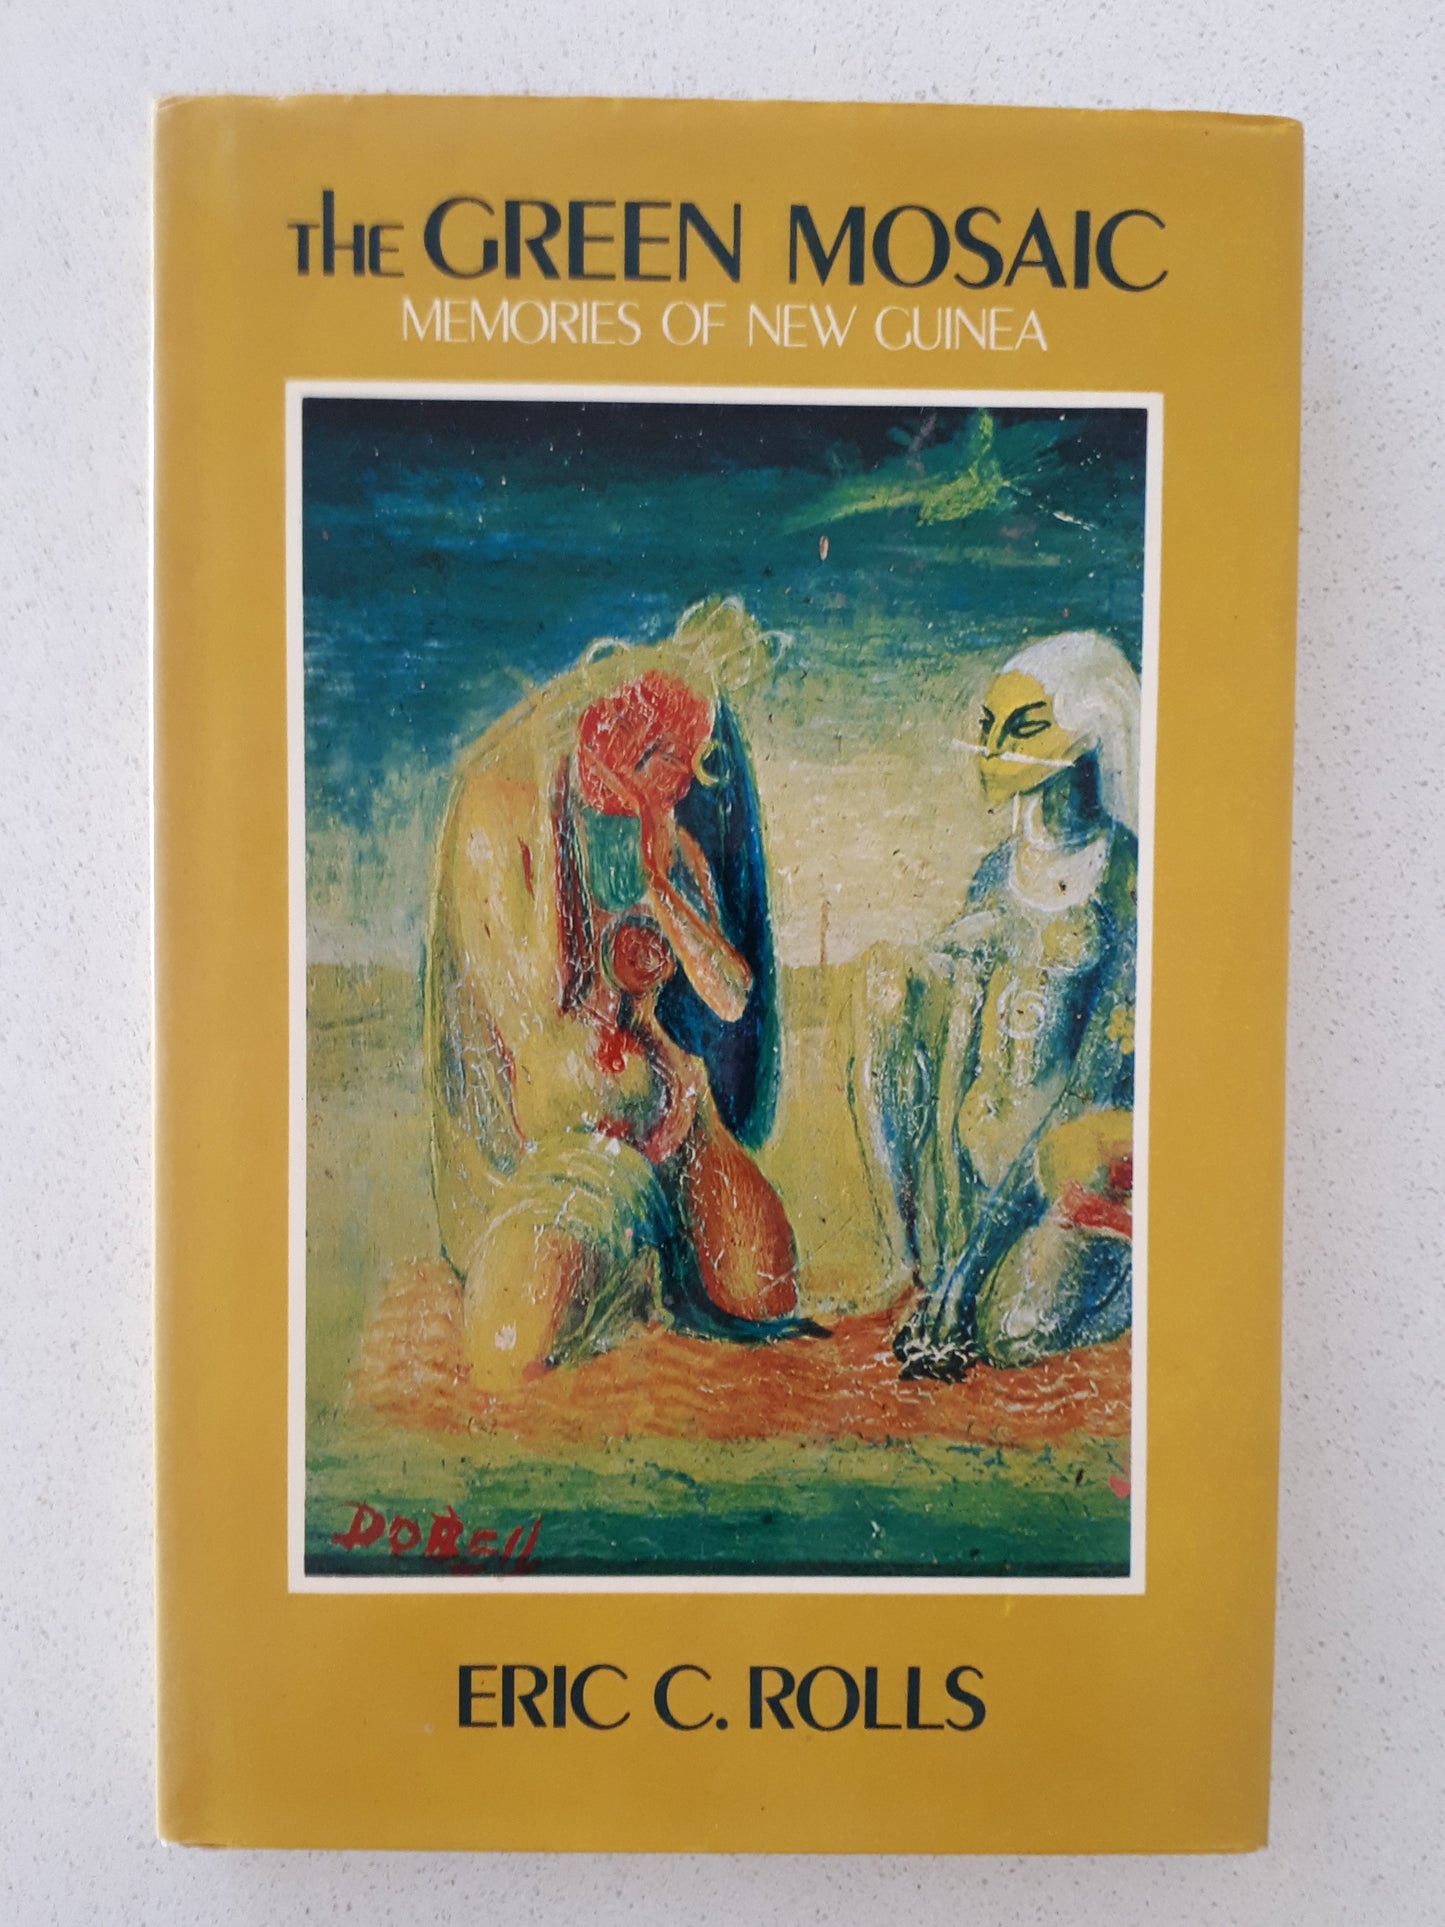 The Green Mosaic by Eric C. Rolls